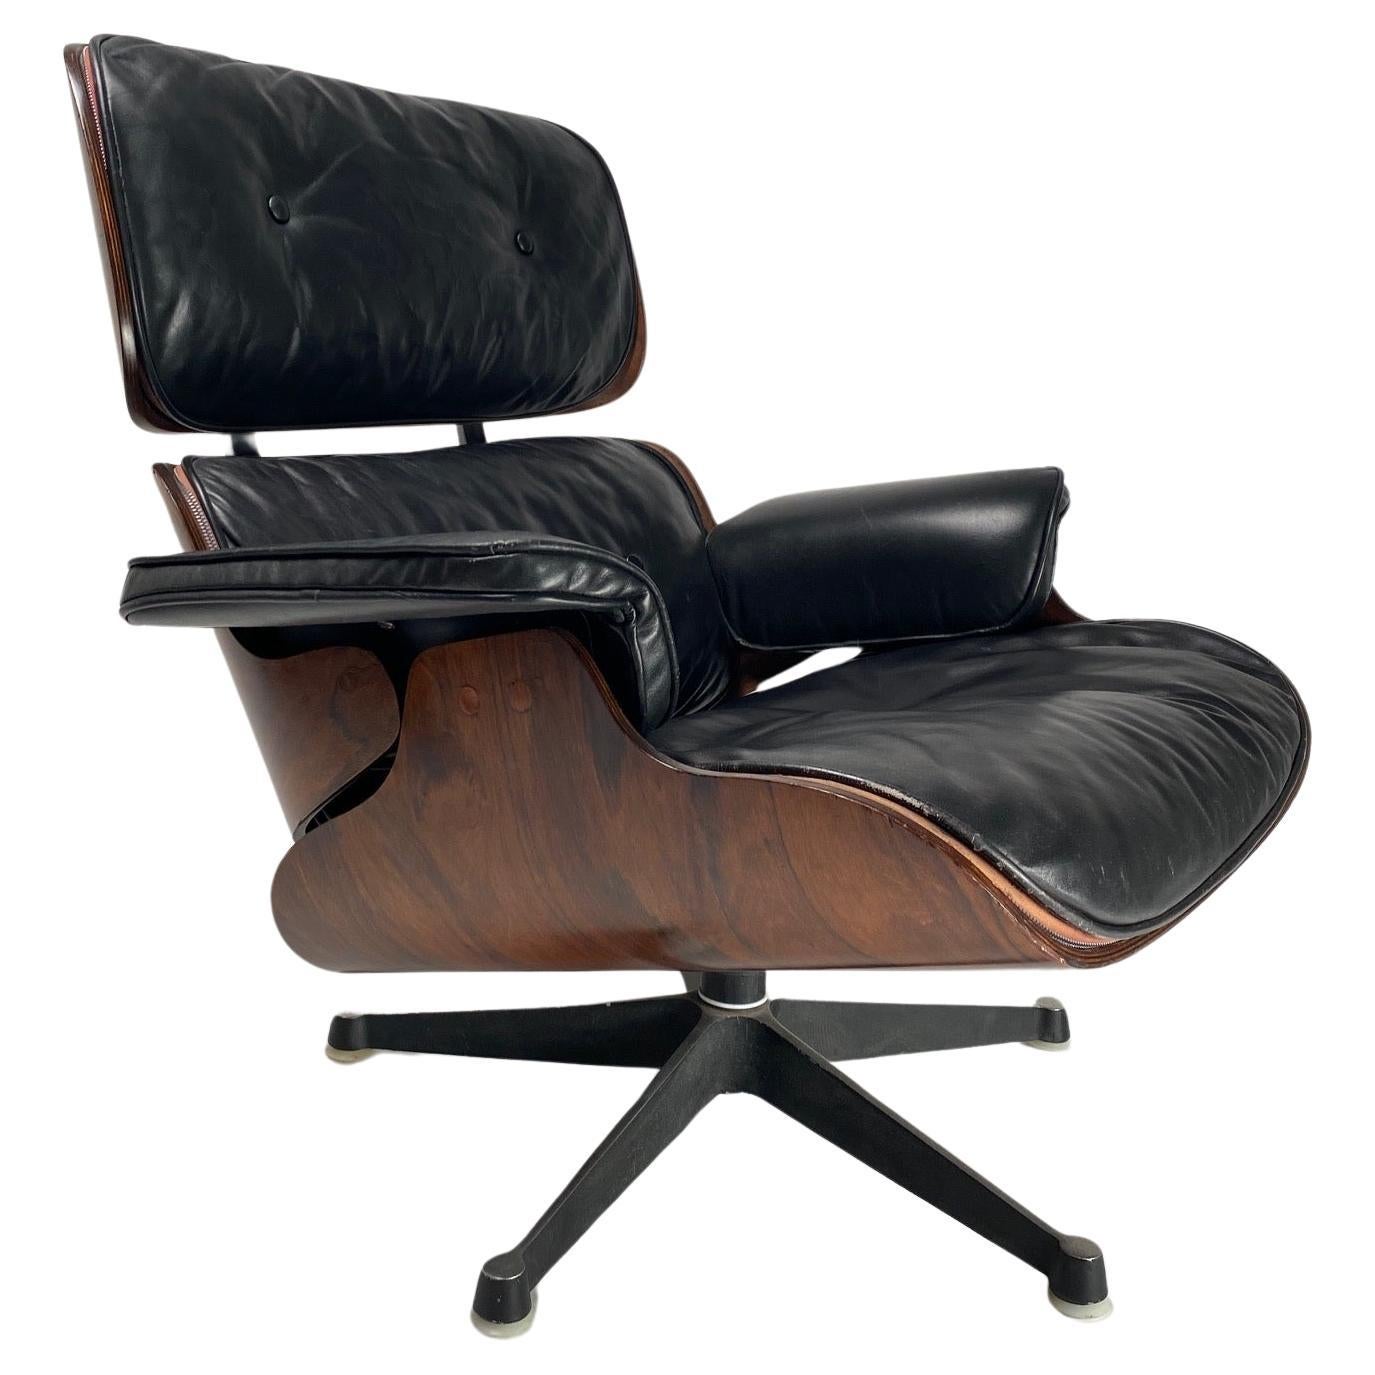 Charles Eames, Lounge Chair in black leather by Herman Miller 